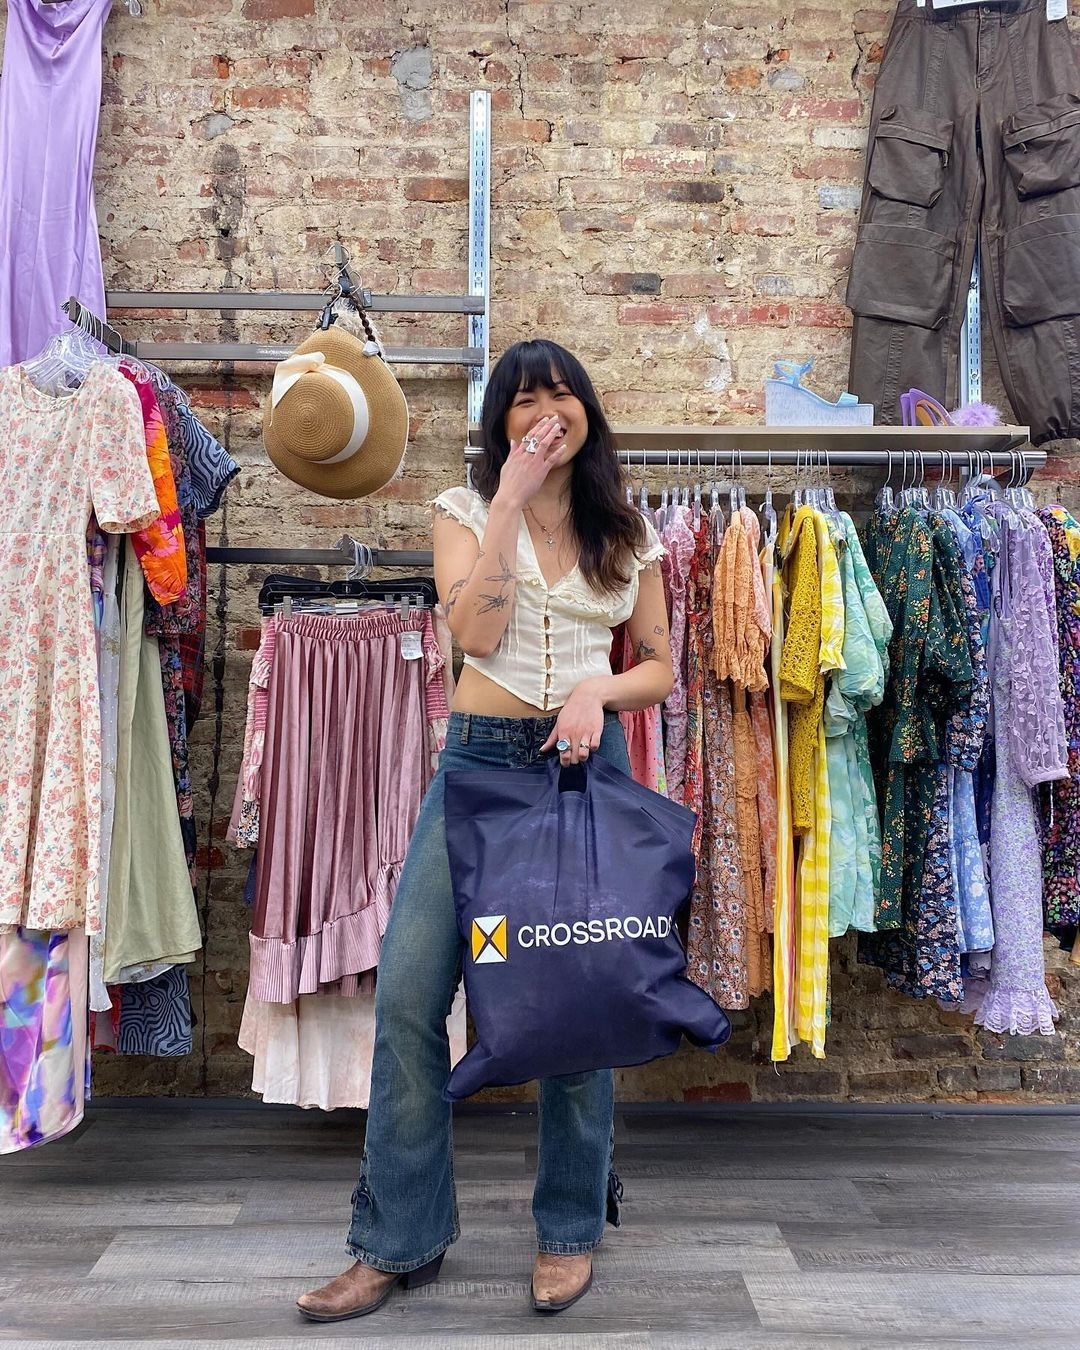 There is no better feeling than leaving Crossroads with a full bag. 🛍✨

Want to pay little to nothing for your #CrossroadsFinds? Sell with us an opt for 50% in Trade. Trade credit can be used at any Crossroads location to cover the cost of new-to-you finds. Click the link in our bio to learn more about Selling. 🧡

📸: Crossroads East Village @crossroads_newyork 

#crossroadstrading #crossroadsfinds #crossroadsstore #fashionfinds #buyselltrade #style #thriftfinds #consignment #shopping #womensfashion #mensfashion #fashionblogger #ootd #fashion #thrift #sustainablefashion #secondhandfirst #shopthrift #consignment #thrifted